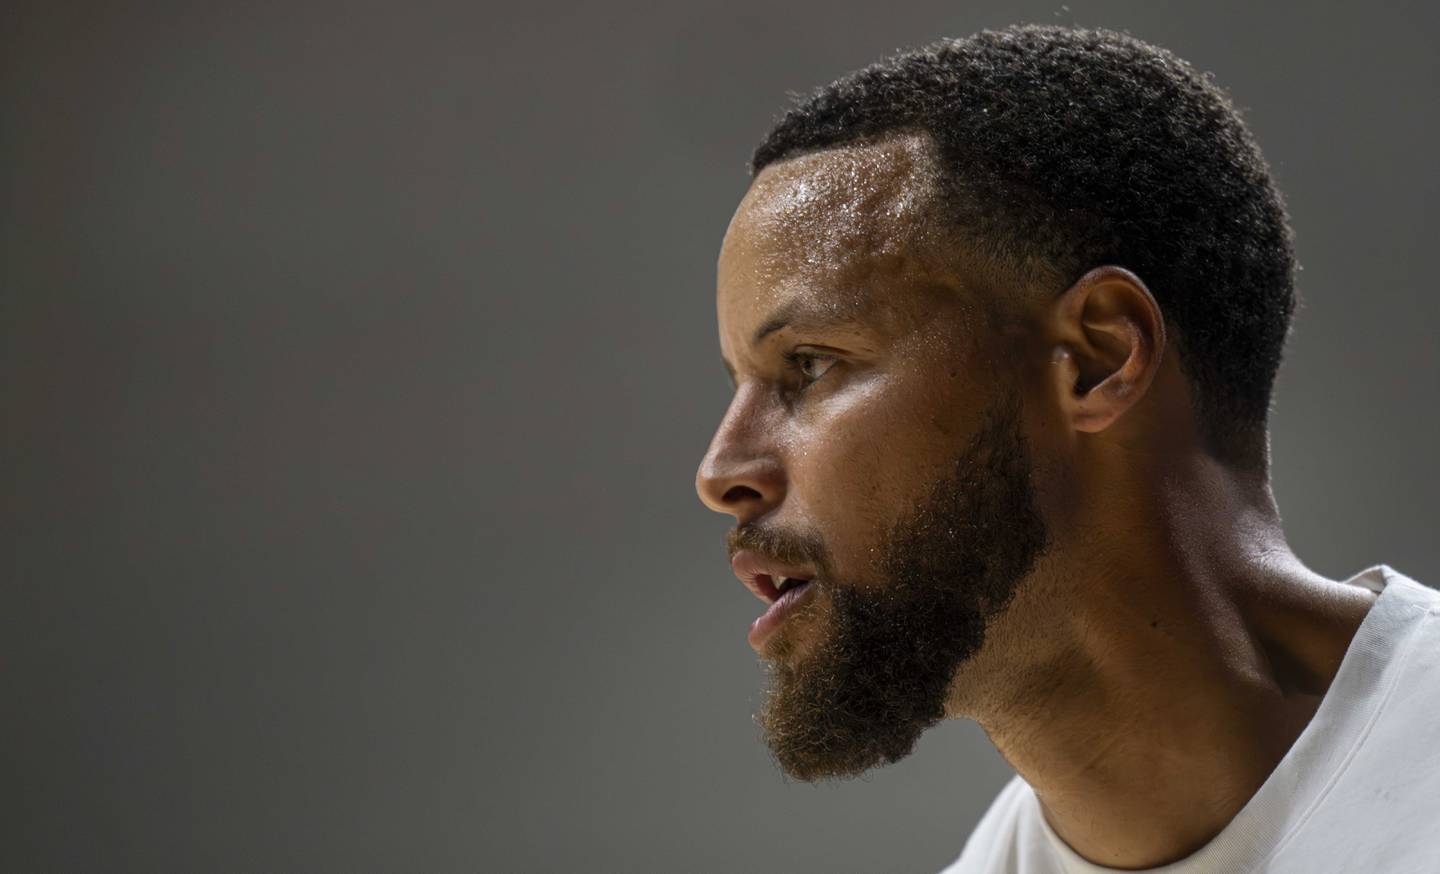 Warriors basketball player Stephen Curry practices on the court at the Stephen Curry Baltimore Showcase Live at UMBC on August 17, 2023.